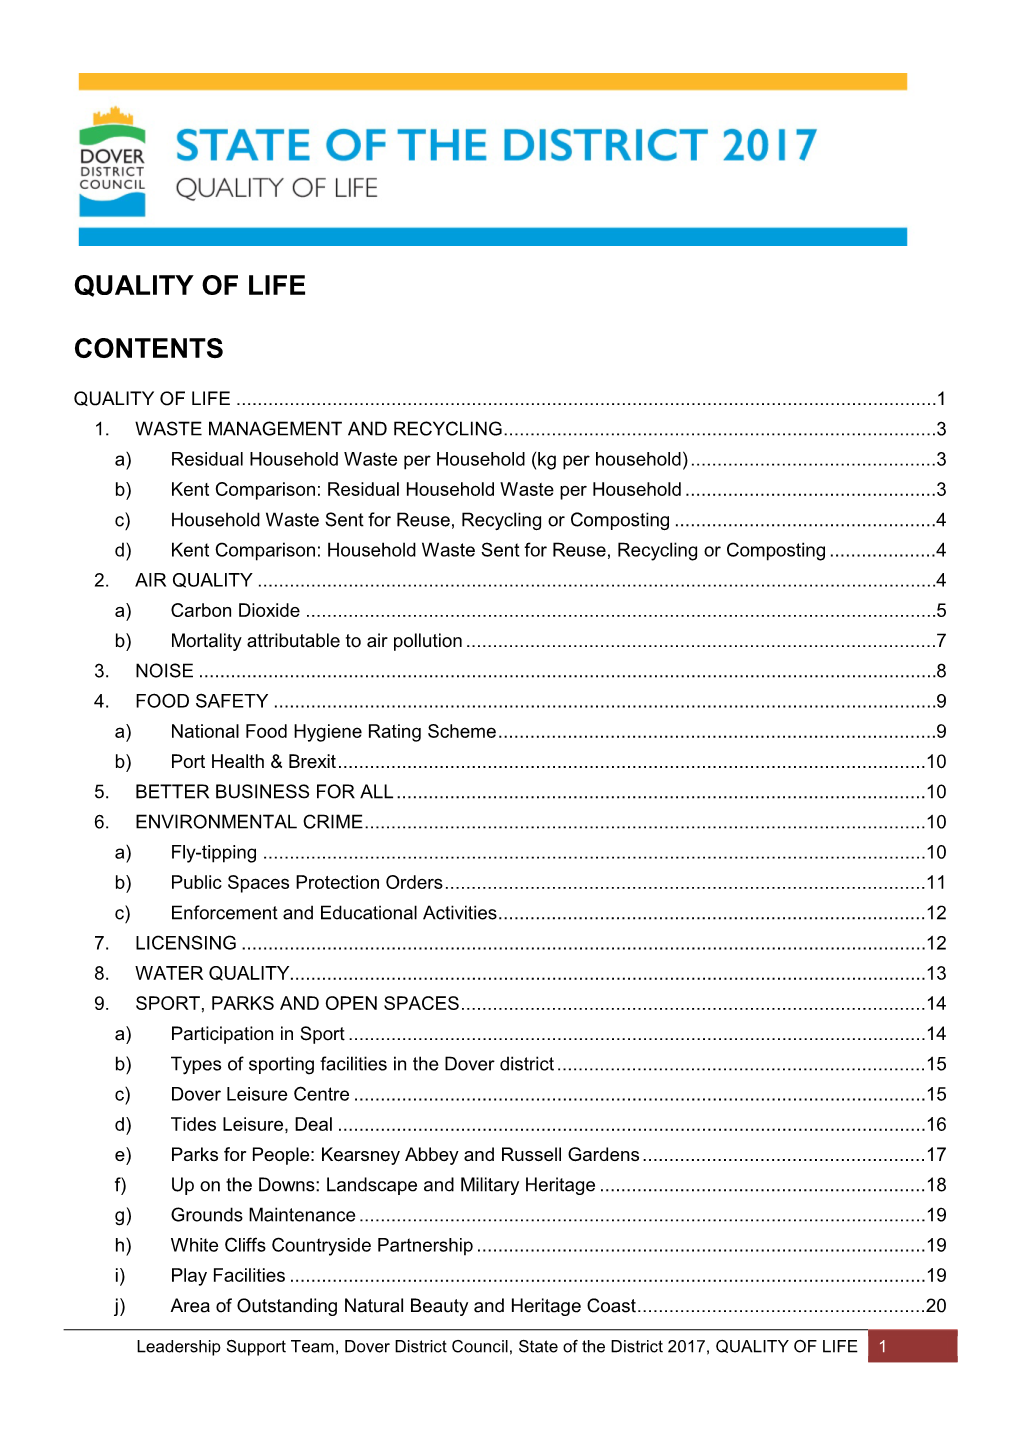 Quality of Life Contents